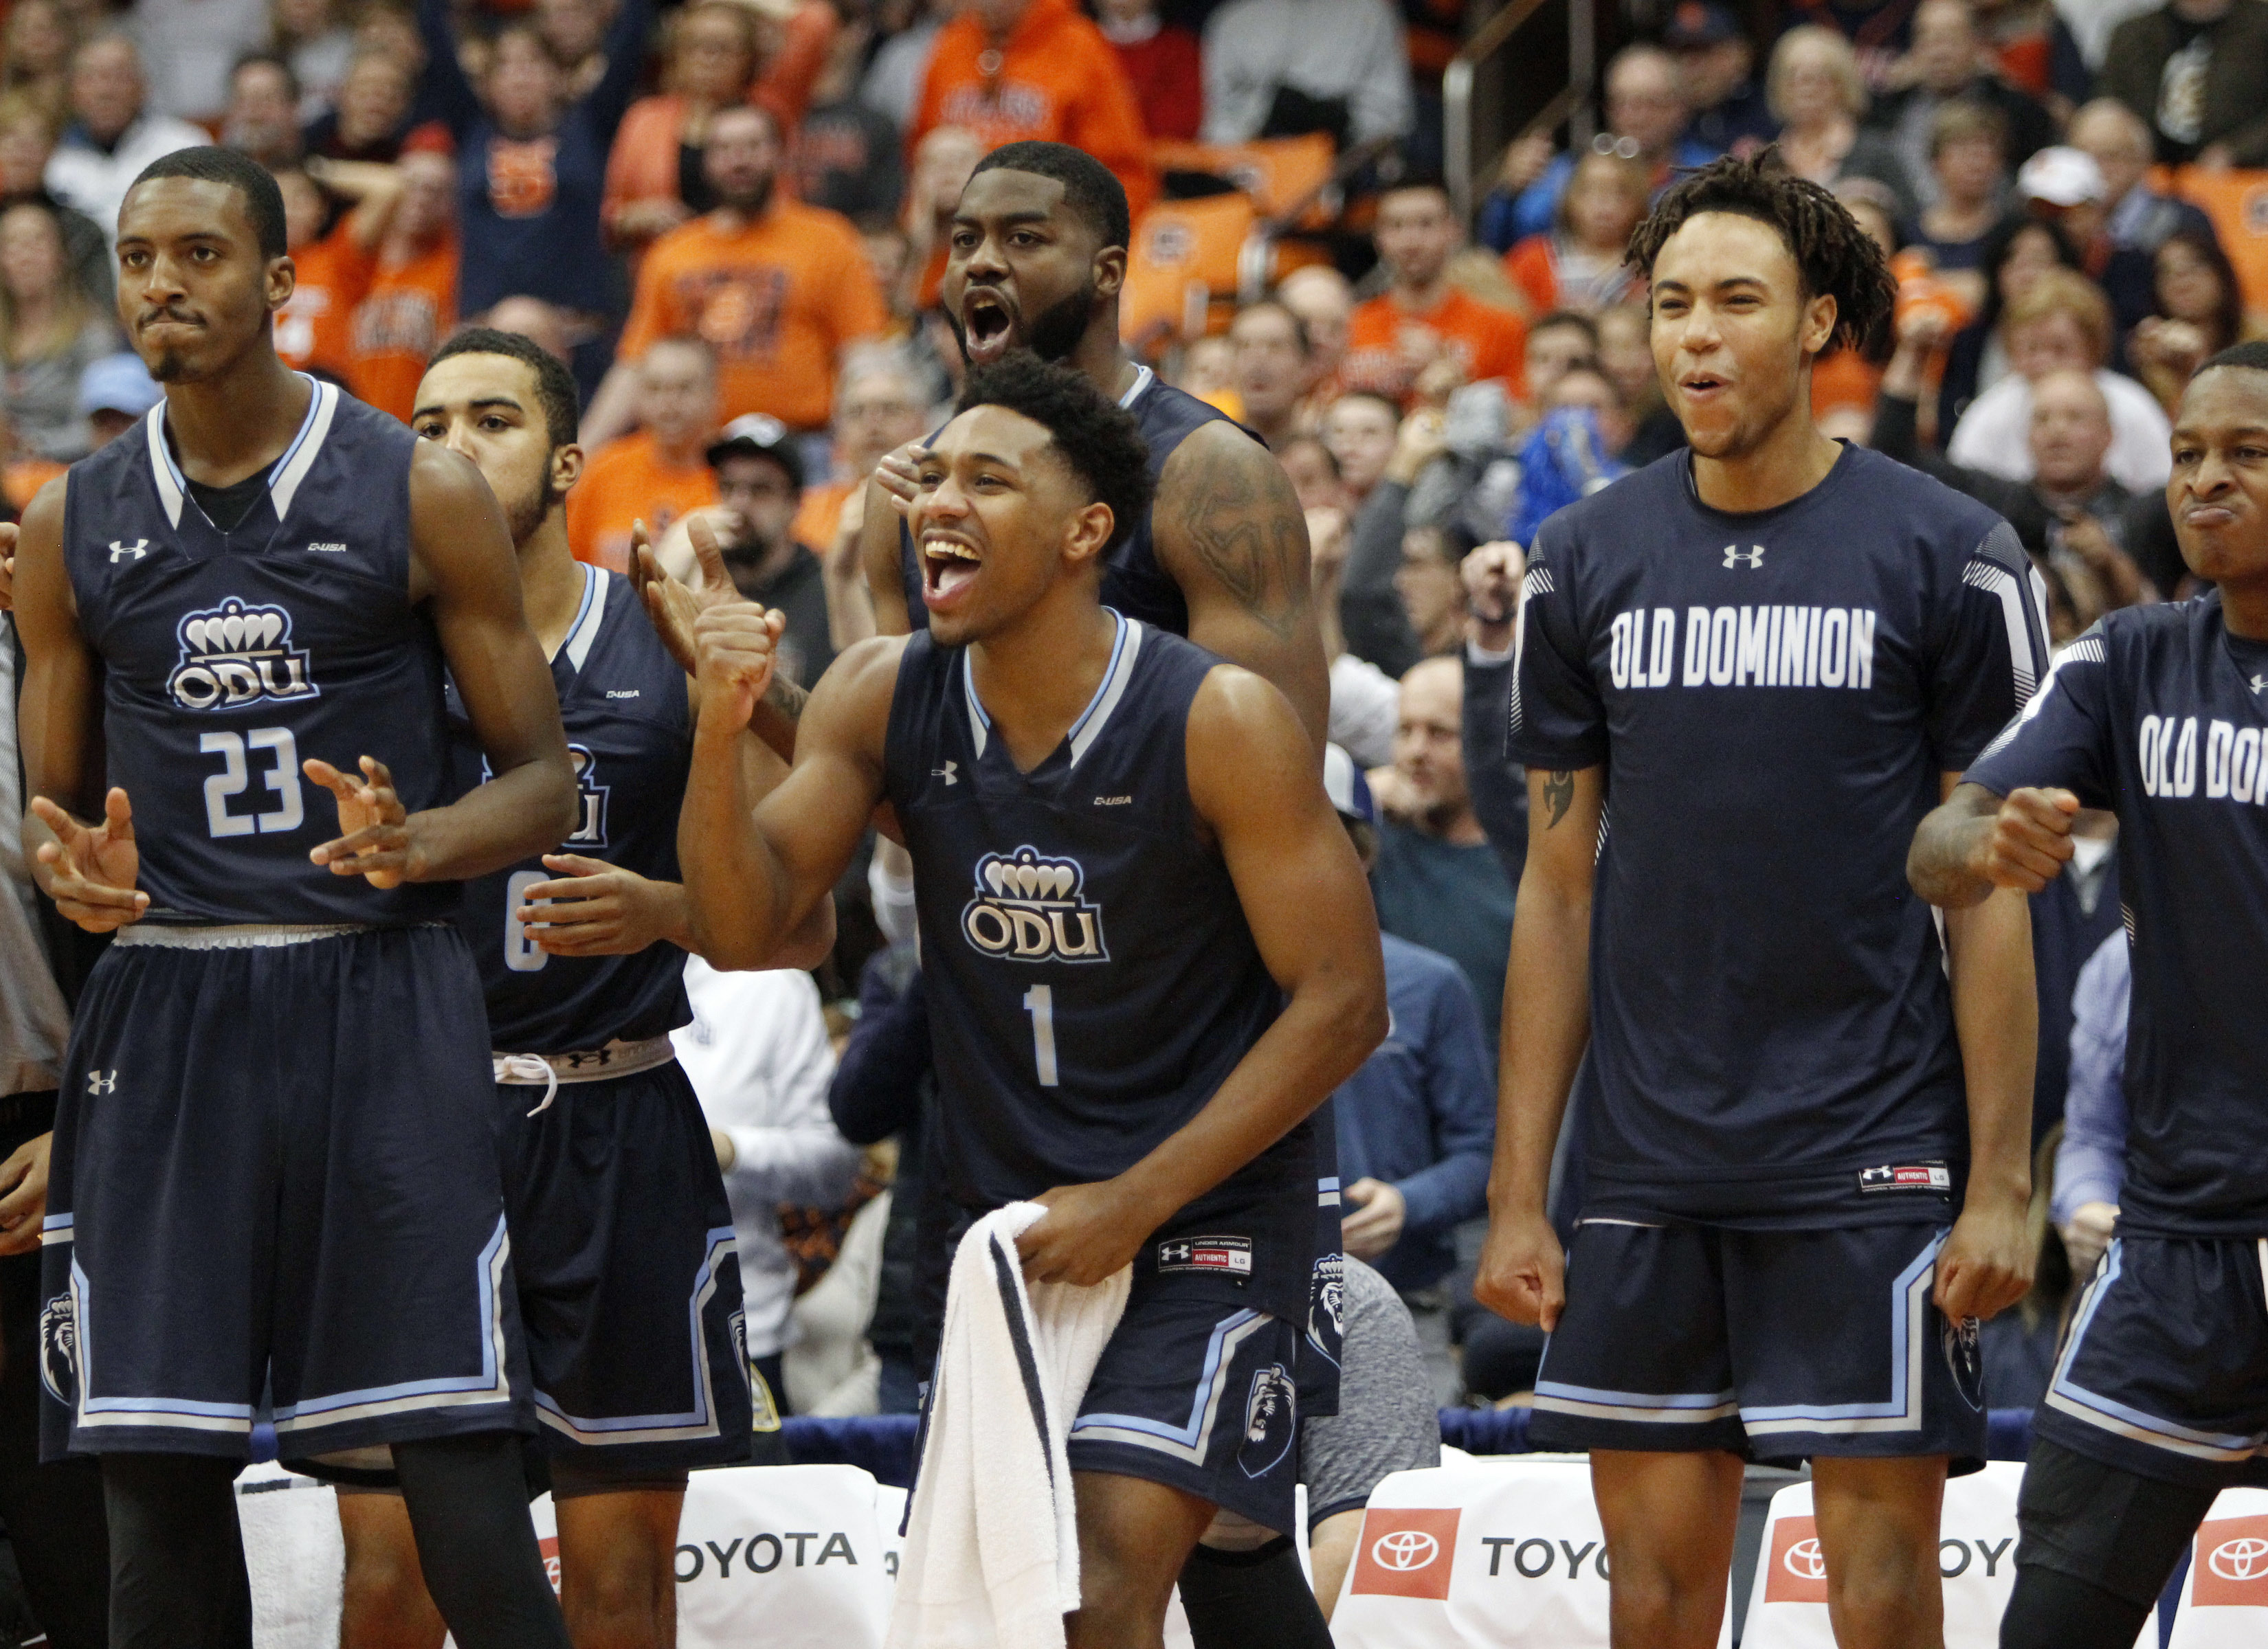 Stith leads Old Dominion’s rally, upset of No. 25 Syracuse